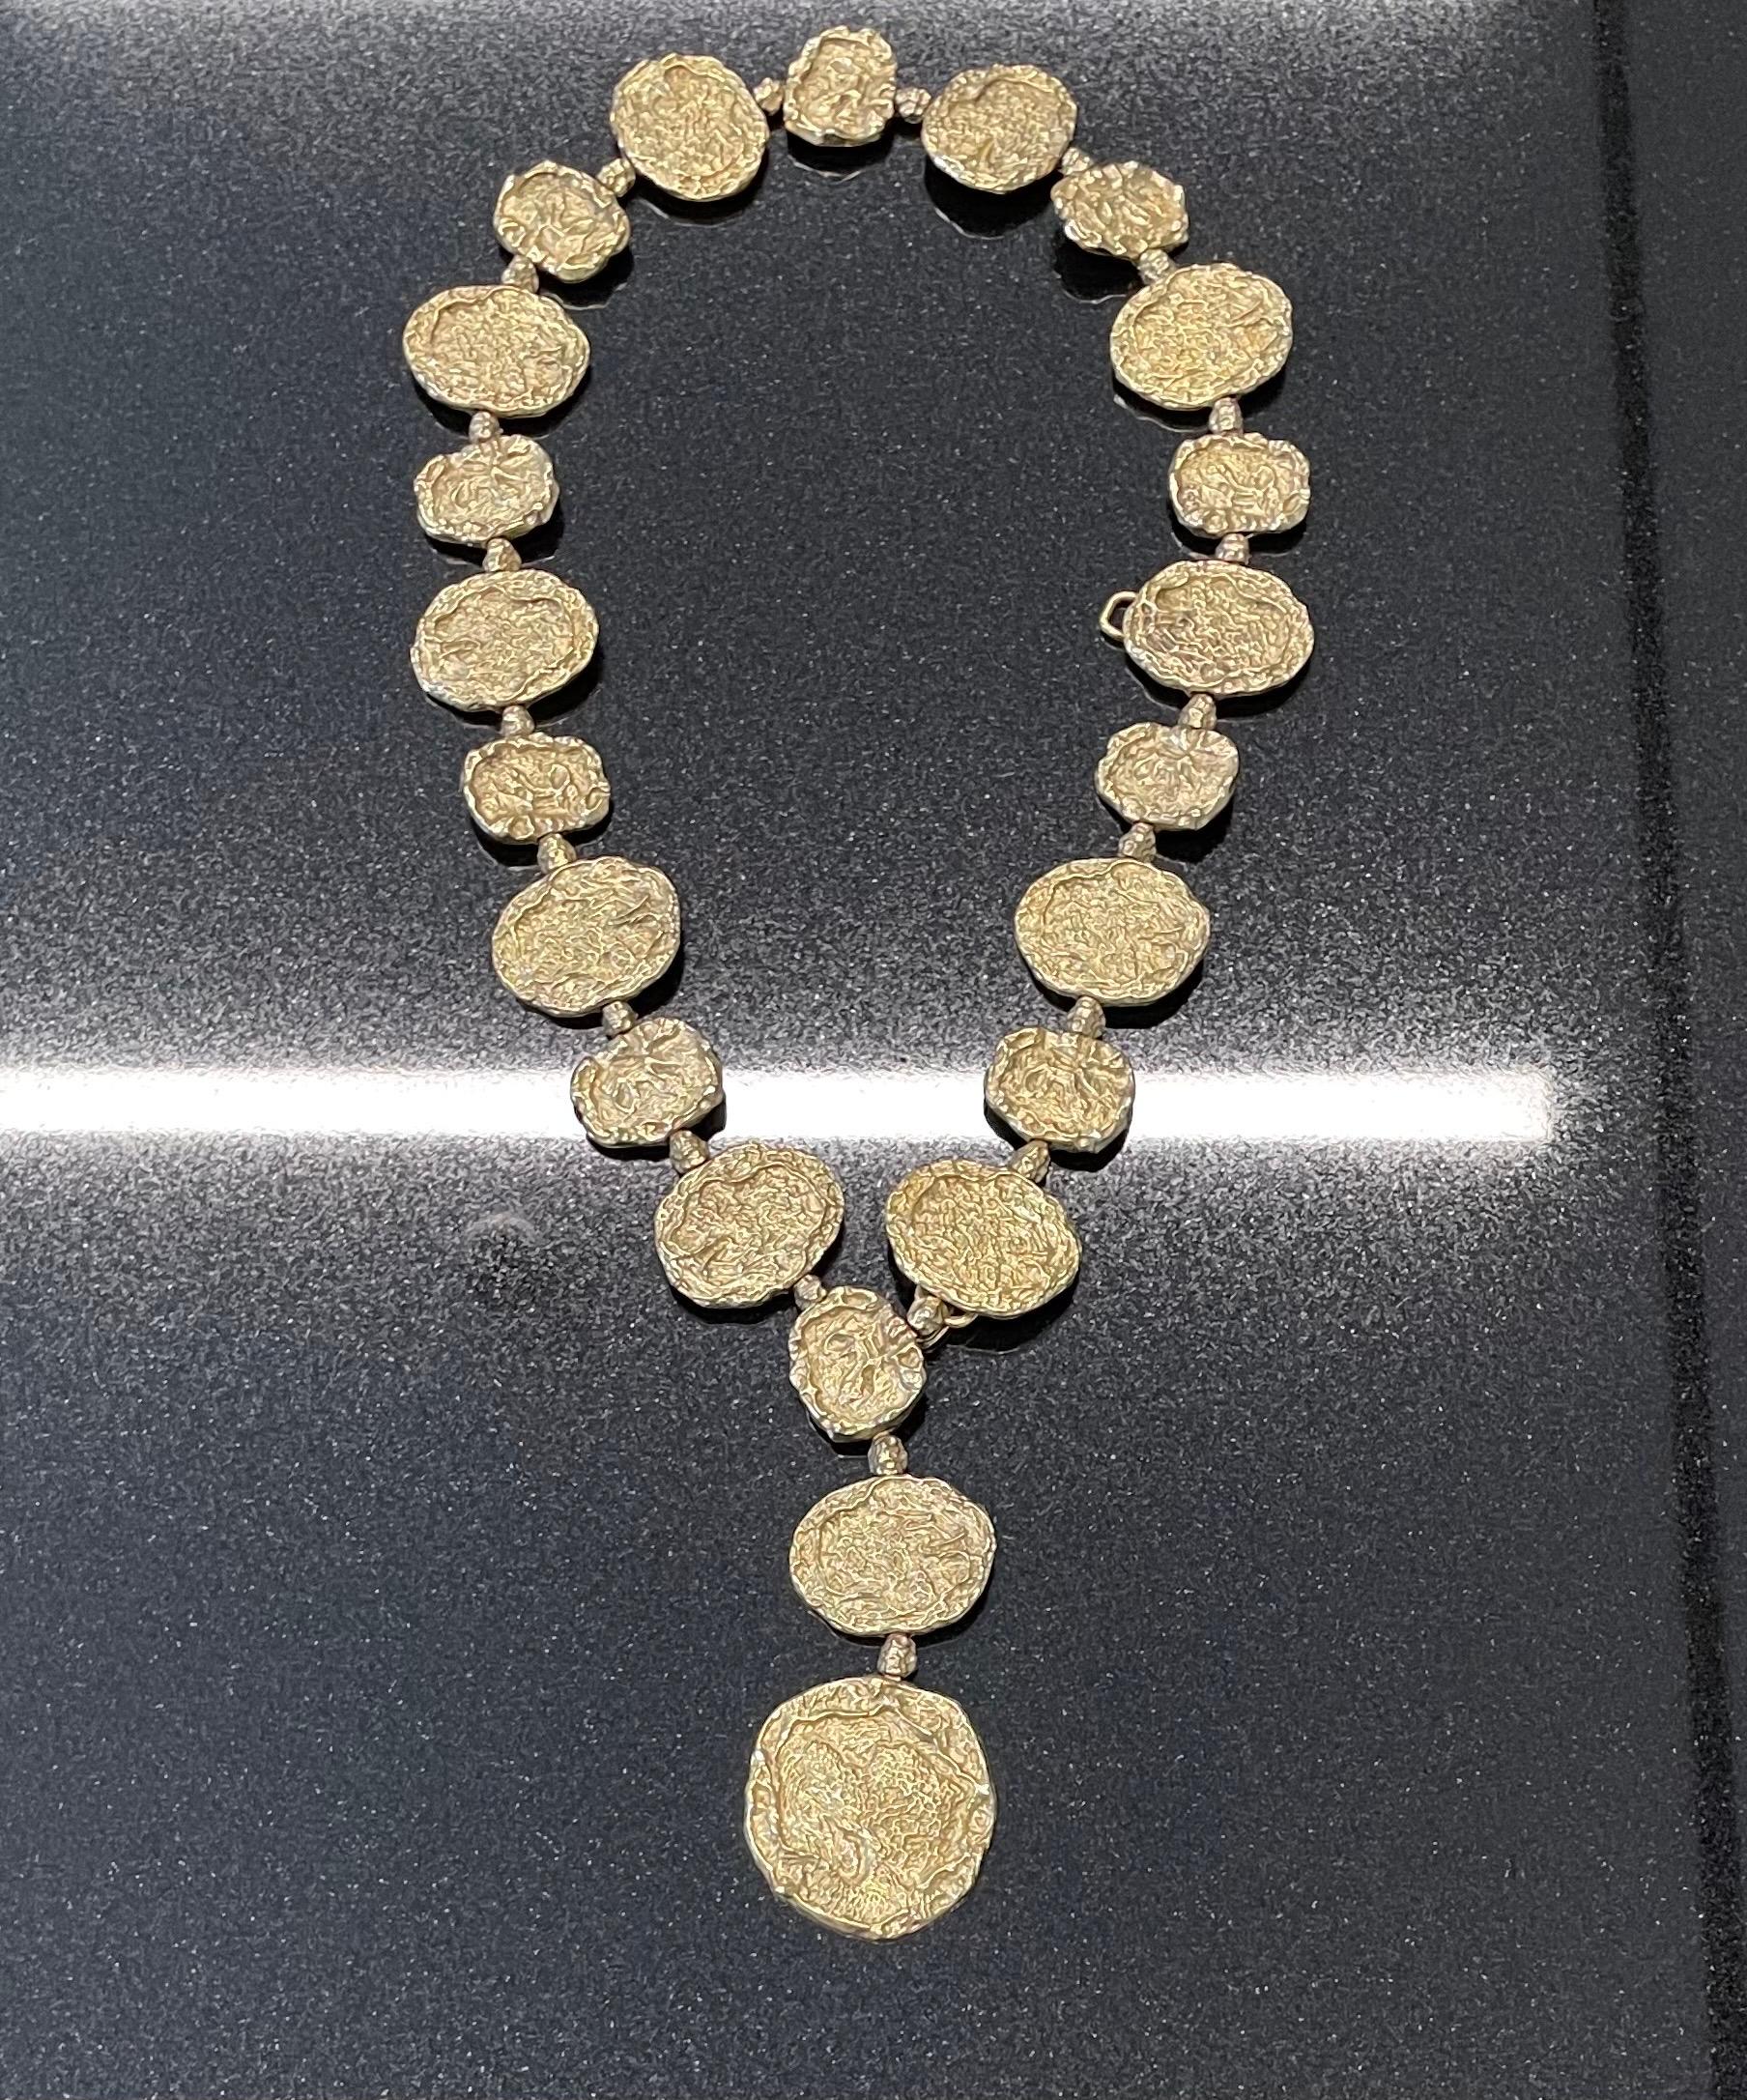 This Cartier Vermeil (gold on sterling silver) necklace is comprised of textured circular discs in the brutalist style, designed circa 1970. The second image shows Jacqueline Kennedy Onassis wearing another example of this design as a belt while on